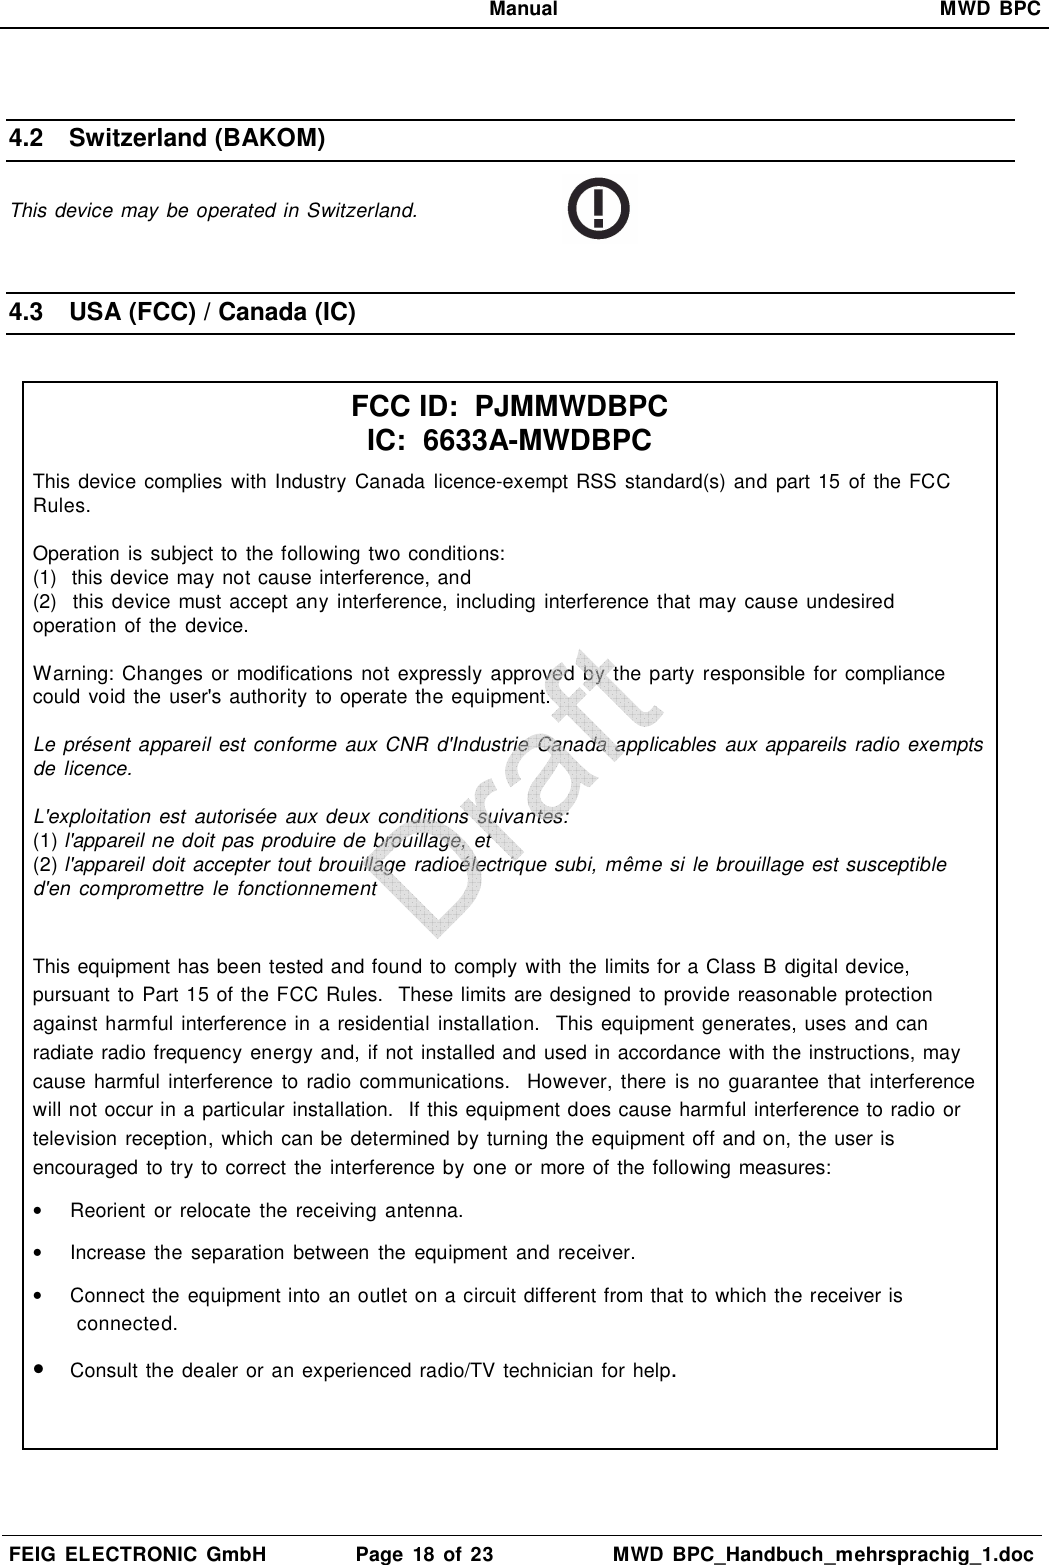   Manual  MWD  BPC  FEIG  ELECTRONIC  GmbH  Page  18  of 23  MWD  BPC_Handbuch_mehrsprachig_1.doc   4.2  Switzerland (BAKOM) This device may be operated in Switzerland.   4.3  USA (FCC) / Canada (IC)   FCC ID:  PJMMWDBPC IC:  6633A-MWDBPC This device complies  with Industry Canada licence-exempt RSS  standard(s) and part 15 of the FCC Rules.  Operation  is subject to  the following two conditions: (1)  this device may not cause interference, and (2)  this device must accept any interference, including  interference that may cause undesired operation of the  device.  Warning:  Changes  or modifications  not expressly  approved  by  the party responsible for compliance could  void the user&apos;s authority to operate the equipment.  Le présent  appareil est conforme aux CNR  d&apos;Industrie Canada applicables  aux appareils radio exempts de licence.  L&apos;exploitation  est  autorisée  aux  deux conditions suivantes: (1) l&apos;appareil ne doit pas produire de brouillage, et (2) l&apos;appareil doit accepter tout brouillage radioélectrique subi, même si le brouillage est susceptible d&apos;en compromettre  le  fonctionnement  This equipment has been tested and found to comply with the limits for a Class B digital device, pursuant to Part 15 of the FCC Rules.  These limits are designed to provide reasonable protection against harmful interference in a residential installation.  This equipment generates, uses and can radiate radio frequency energy and, if not installed and used in accordance with the instructions, may cause  harmful interference  to  radio communications.   However, there  is  no  guarantee  that interference will not occur in a particular installation.  If this equipment does cause harmful interference to radio or television reception, which can be determined by turning the equipment off and on, the user is encouraged  to try to correct the interference by  one or more of the following measures: •  Reorient  or  relocate  the receiving antenna. •  Increase  the  separation  between  the  equipment  and receiver. •  Connect the equipment into an outlet on a circuit different from that to which the receiver is connected. • Consult the dealer or an experienced radio/TV technician for help.   